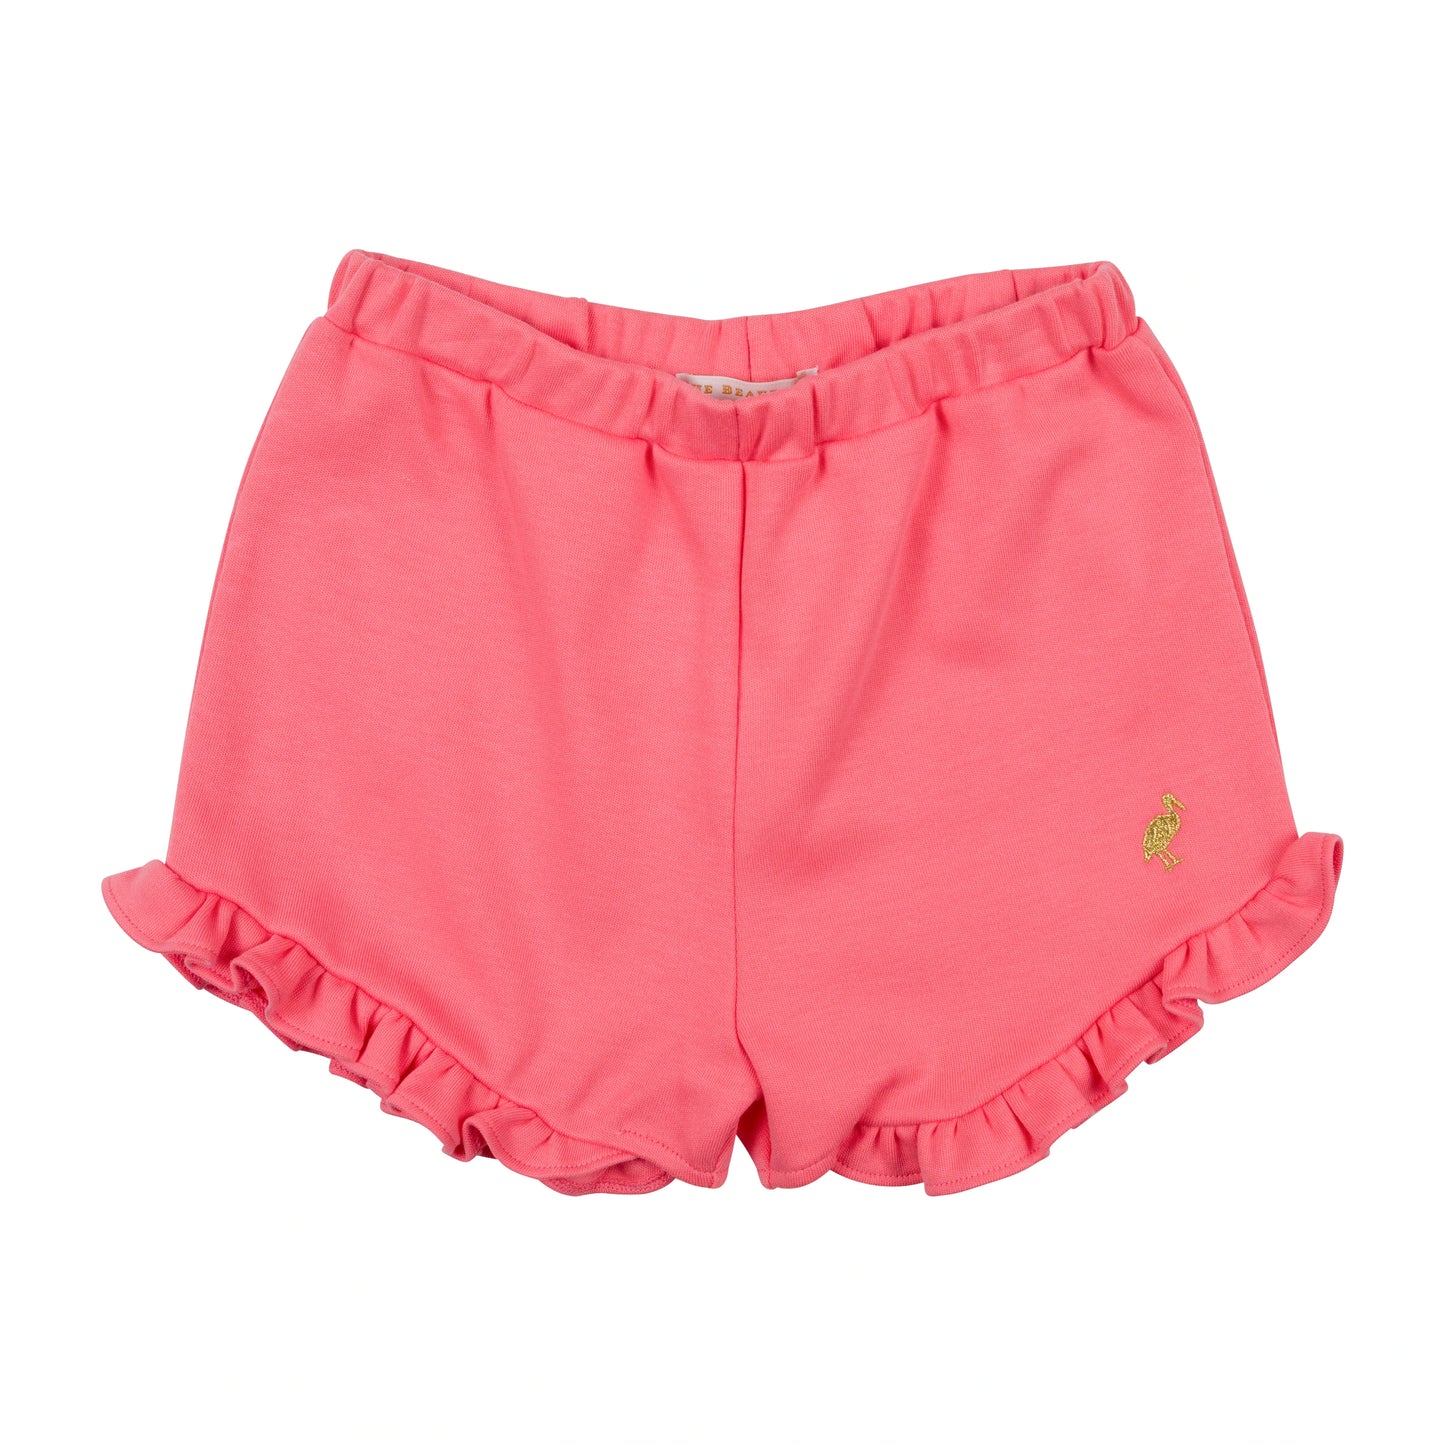 SHELBY ANNE SHORTS - PARROT CAY CORAL